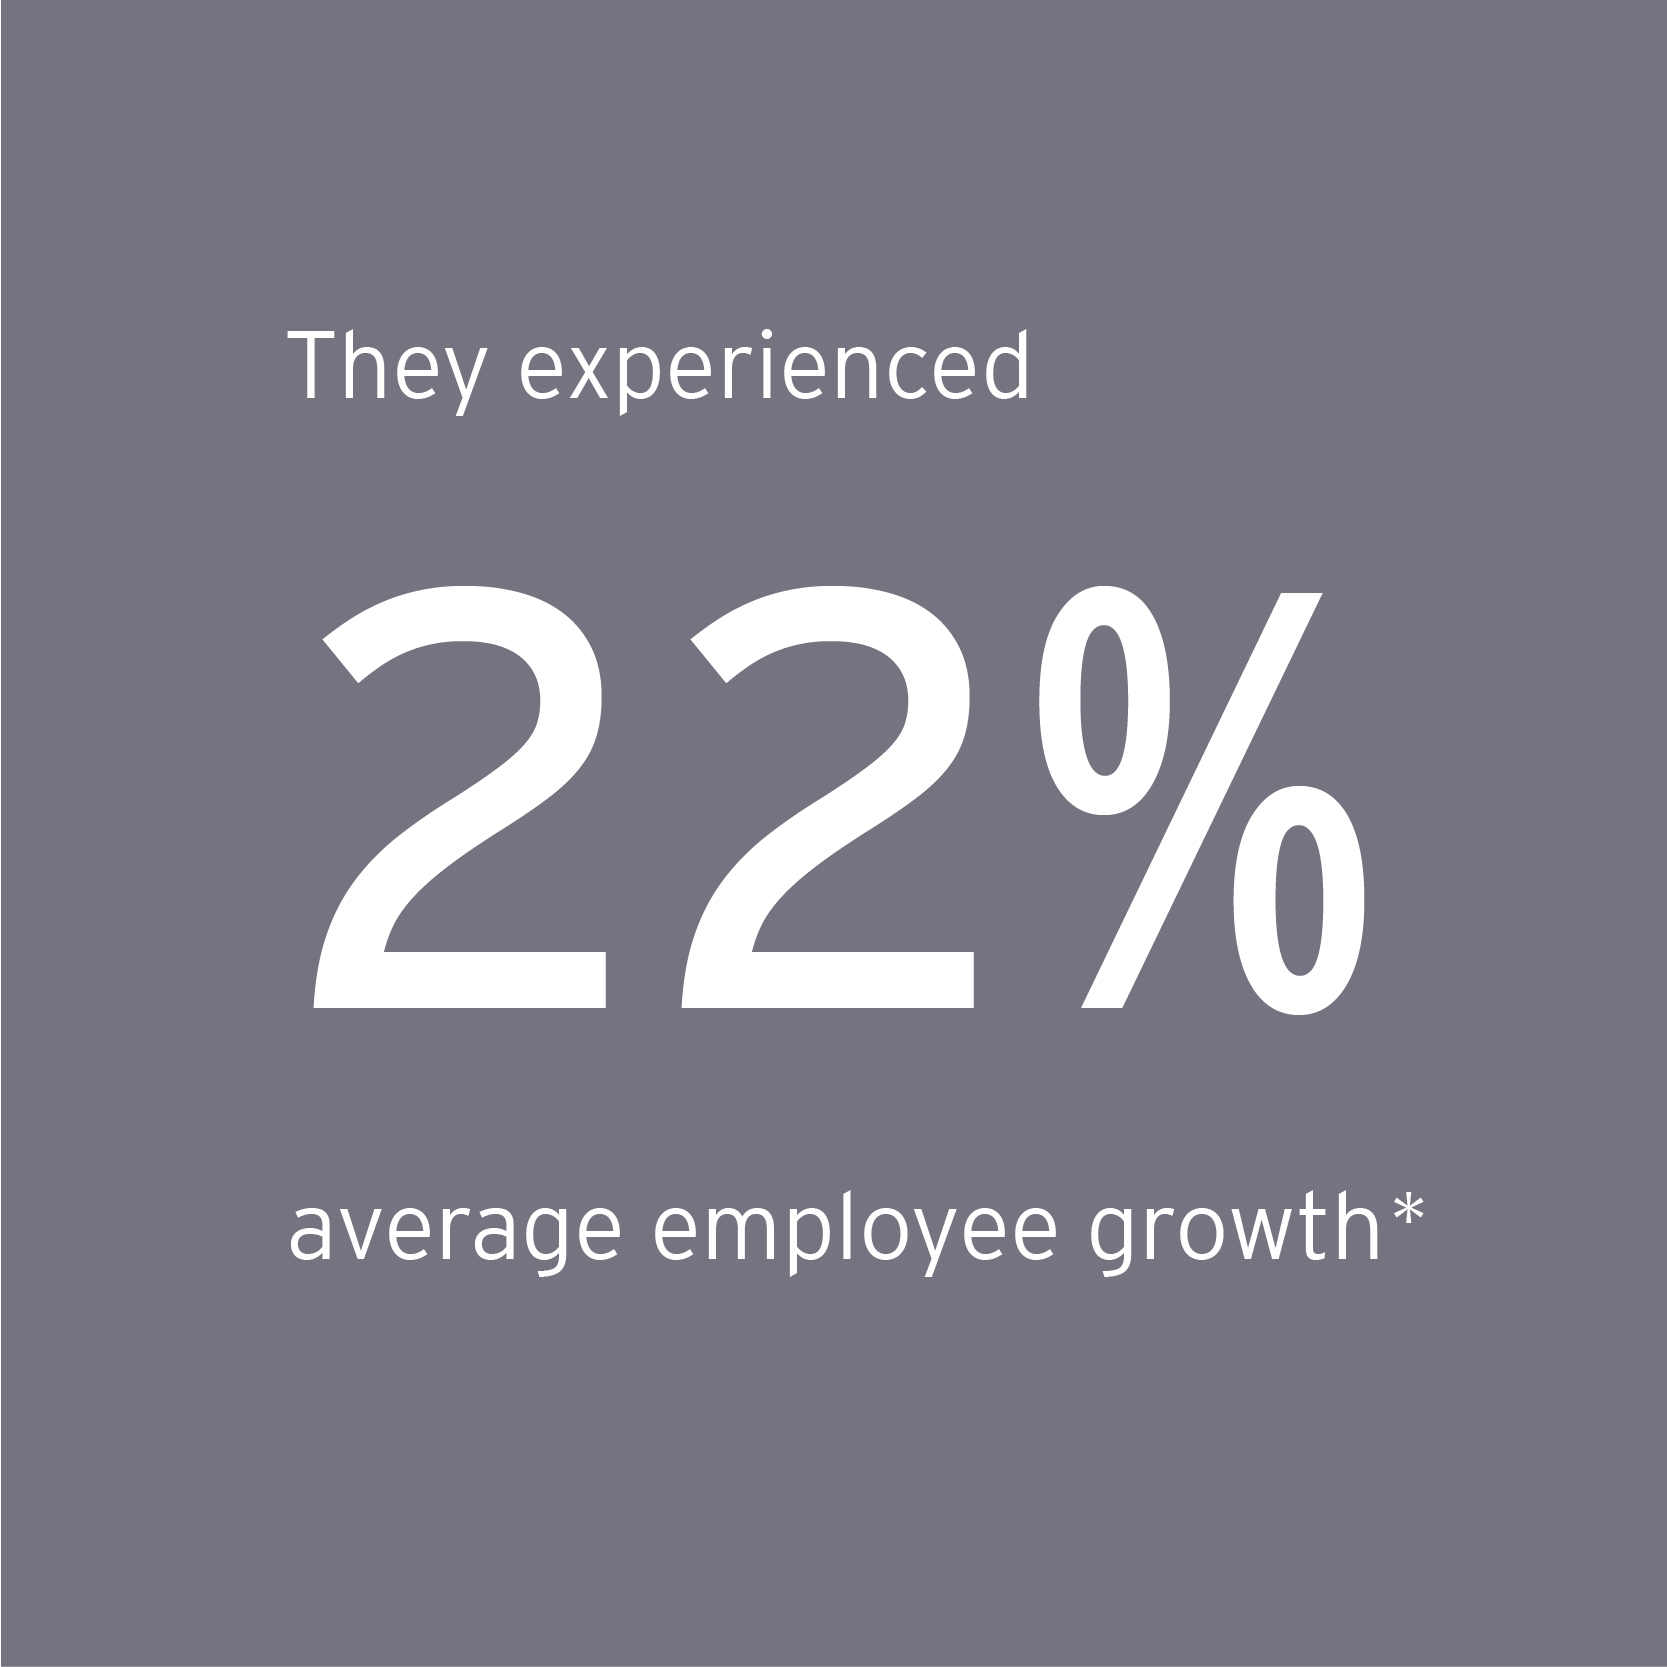 EOY Pacific Southwest finalists experienced 22% average employee growth